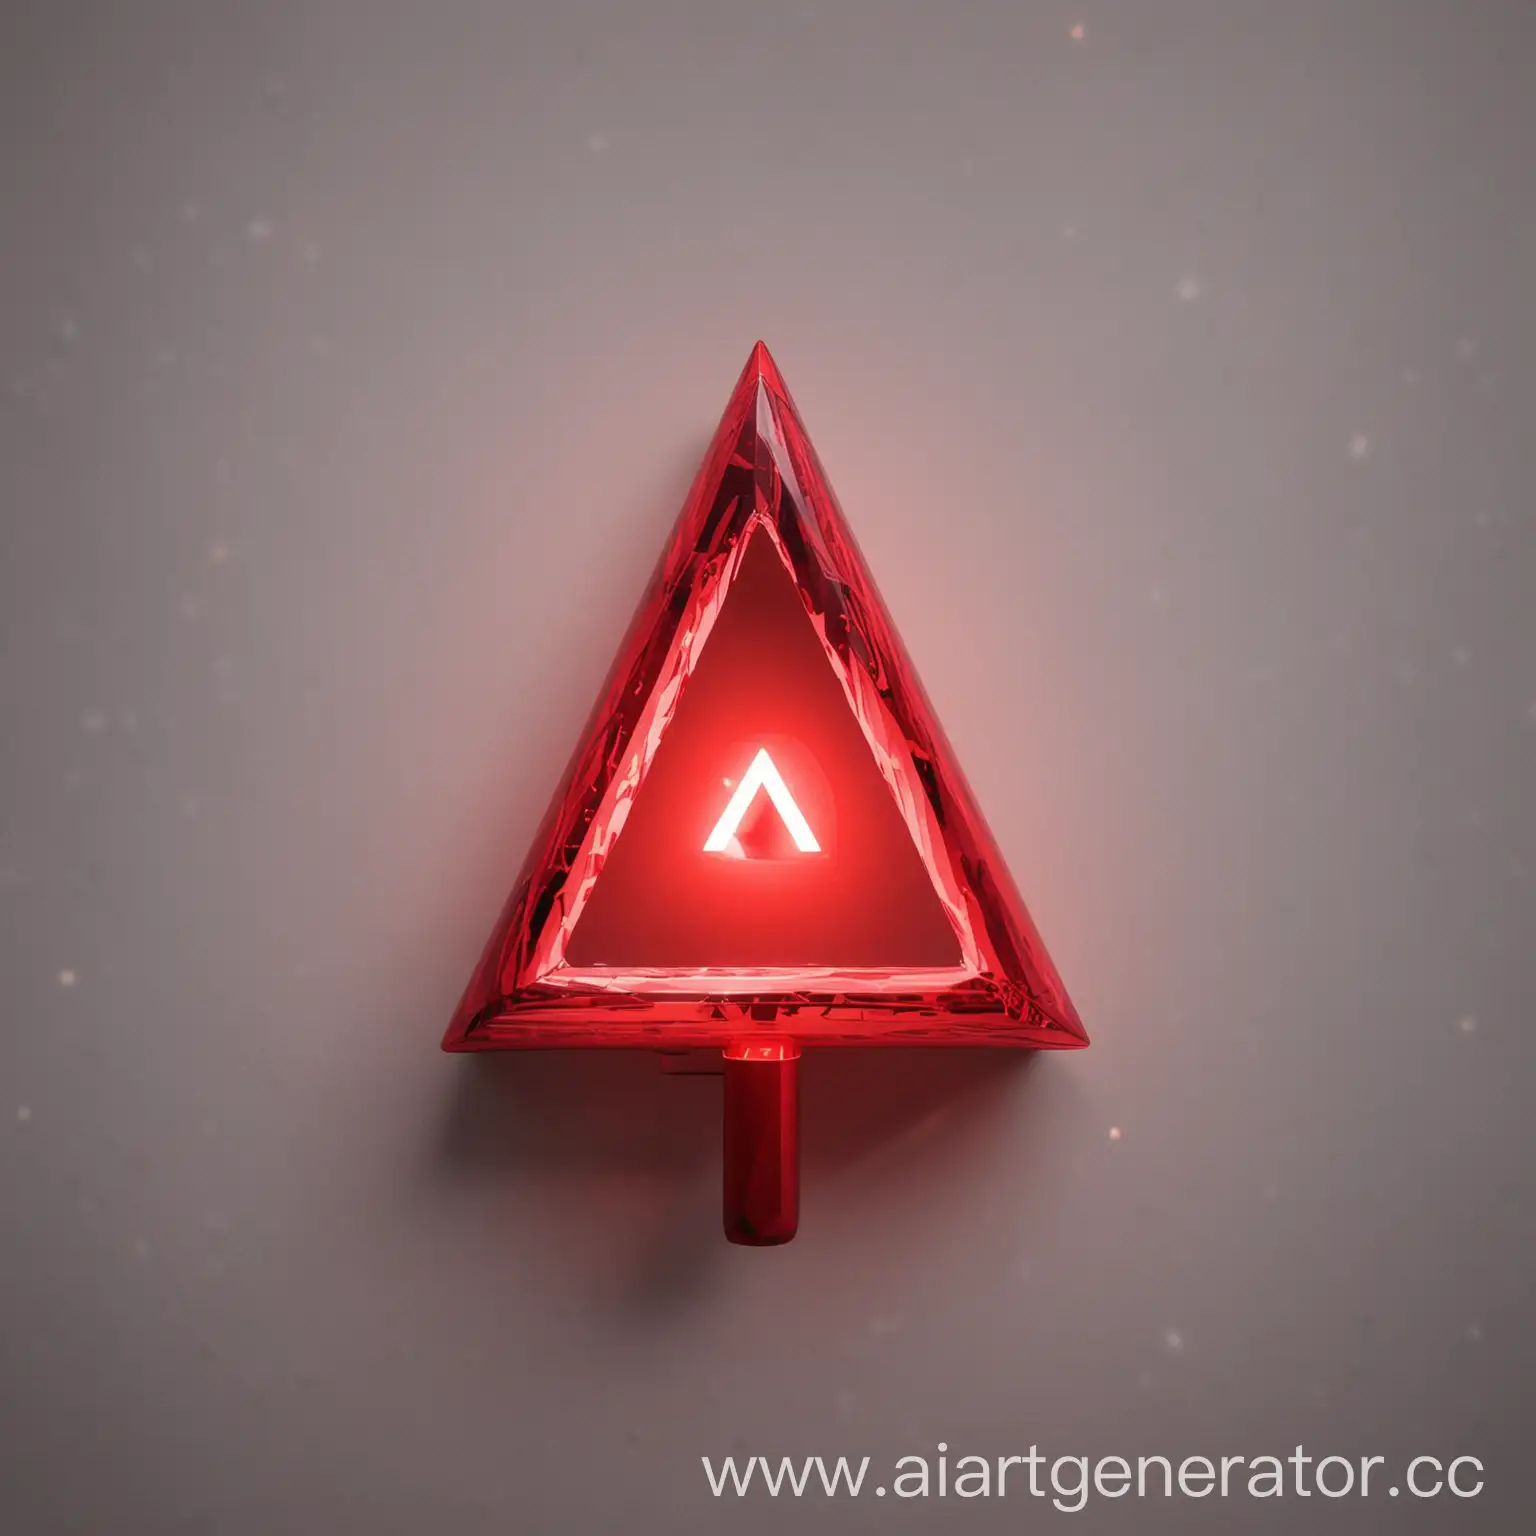 Soloist-with-Red-TriangleShaped-Kpop-Lightstick-Ringtone